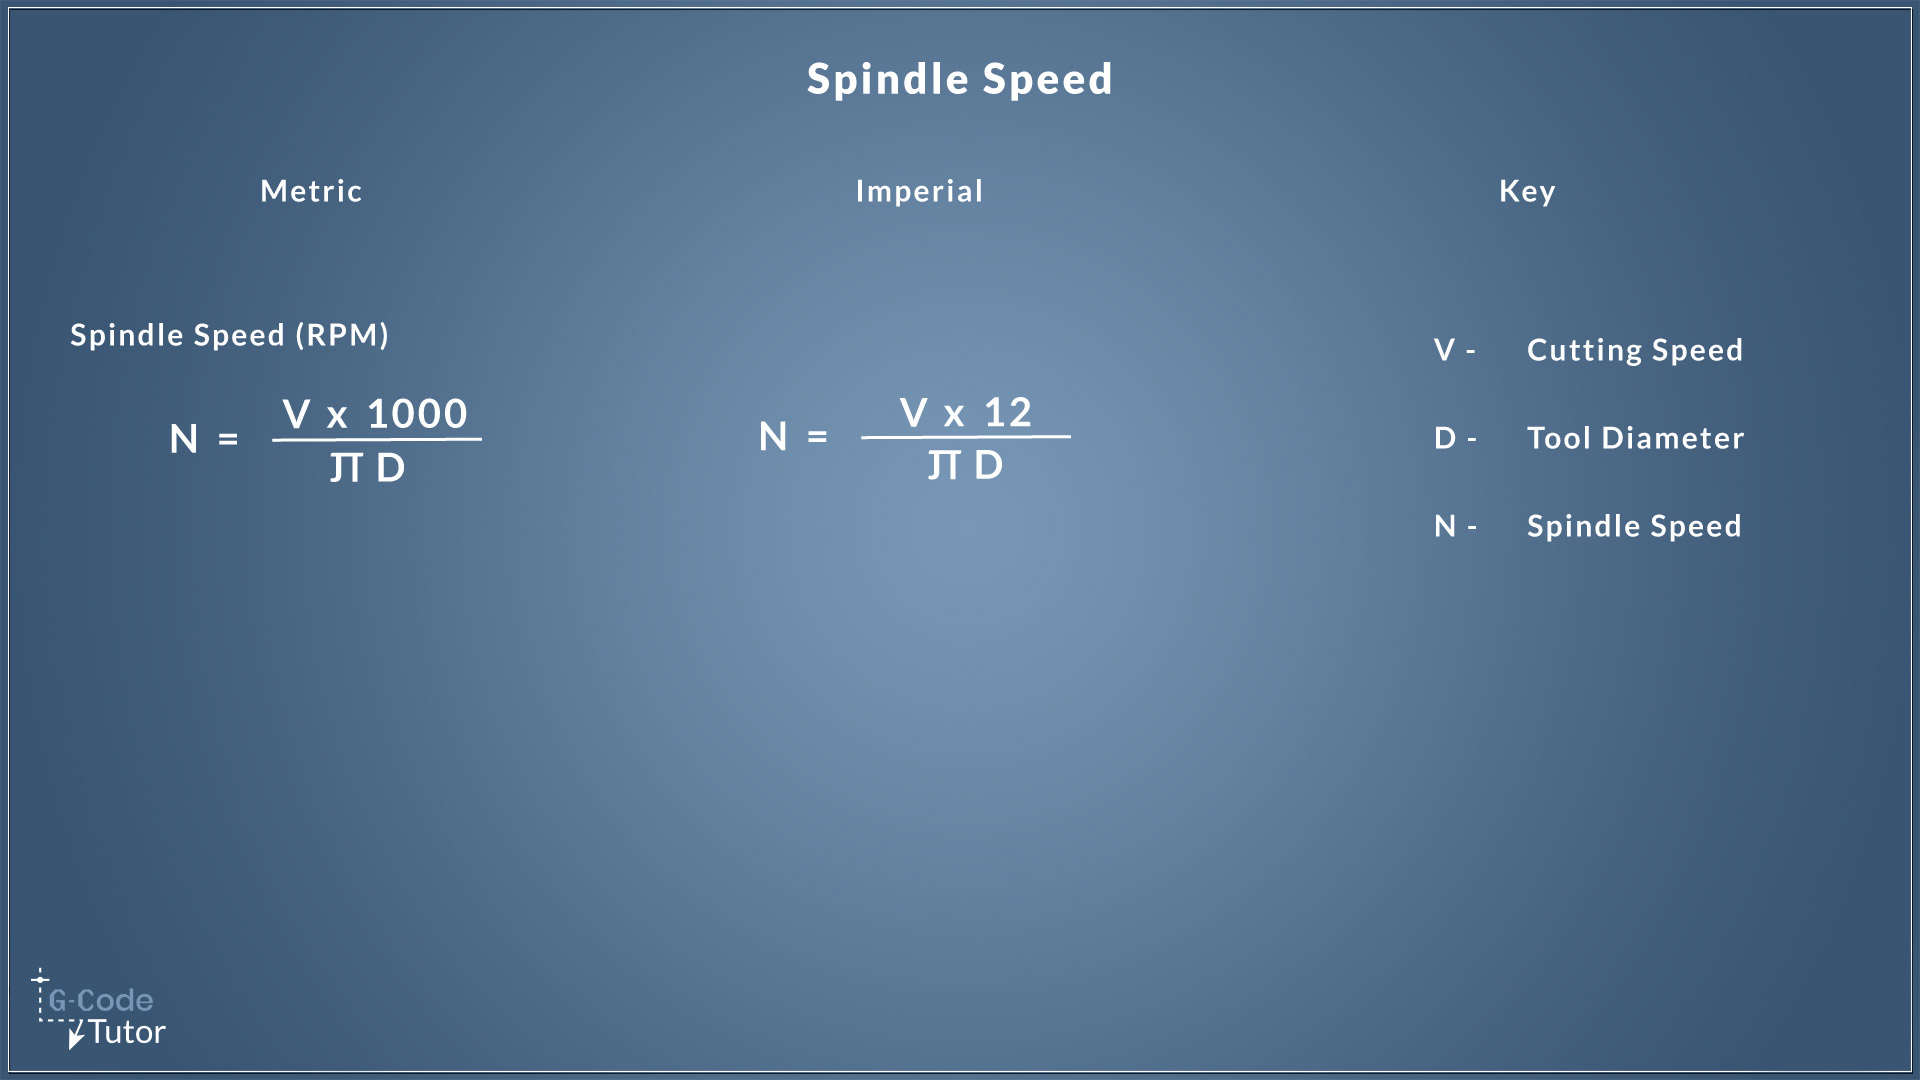 The formula for both metric and imperial spindle speed calculations